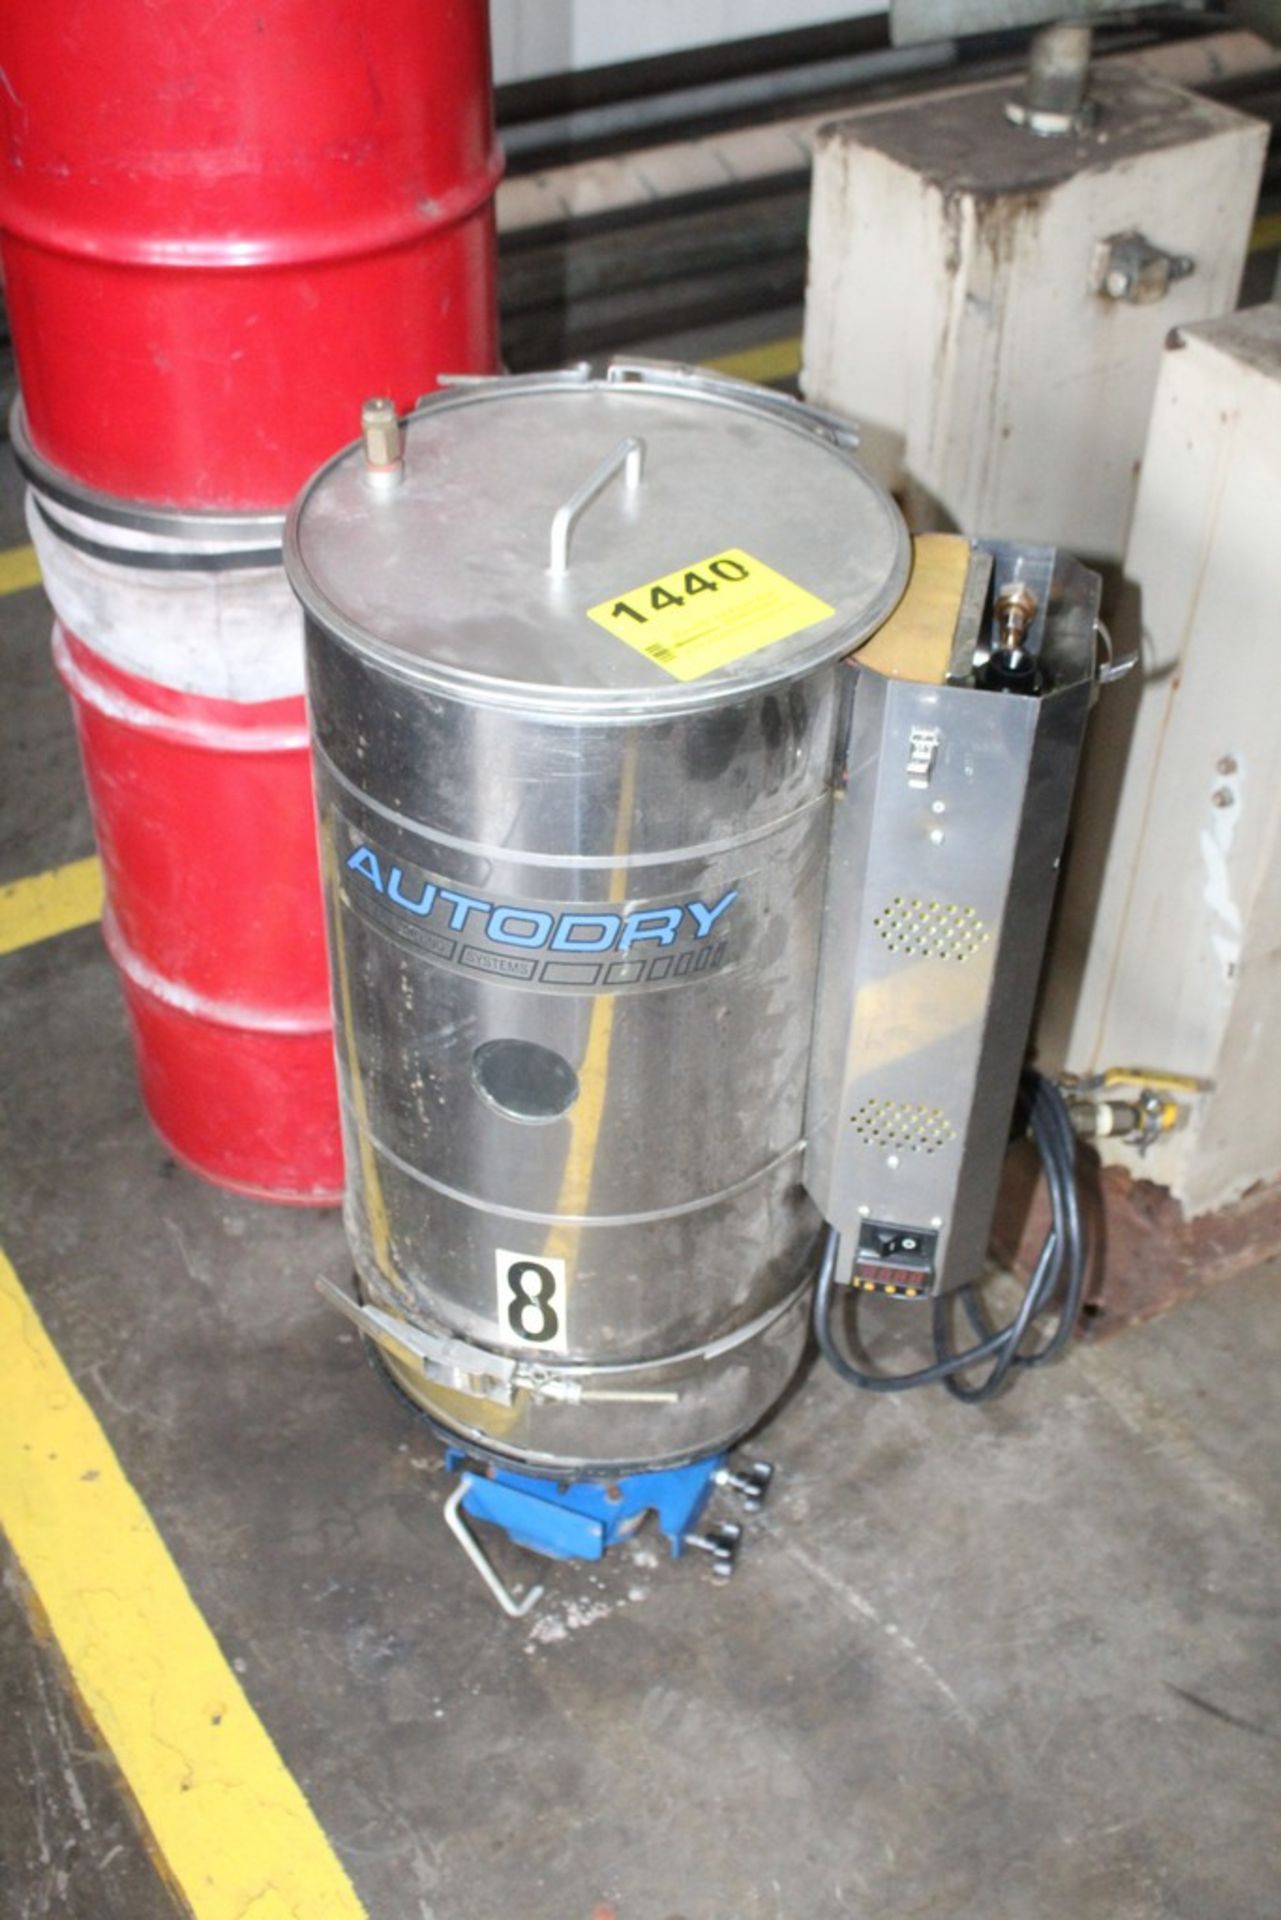 AUTODRY MATERIAL DRYER CANISTER